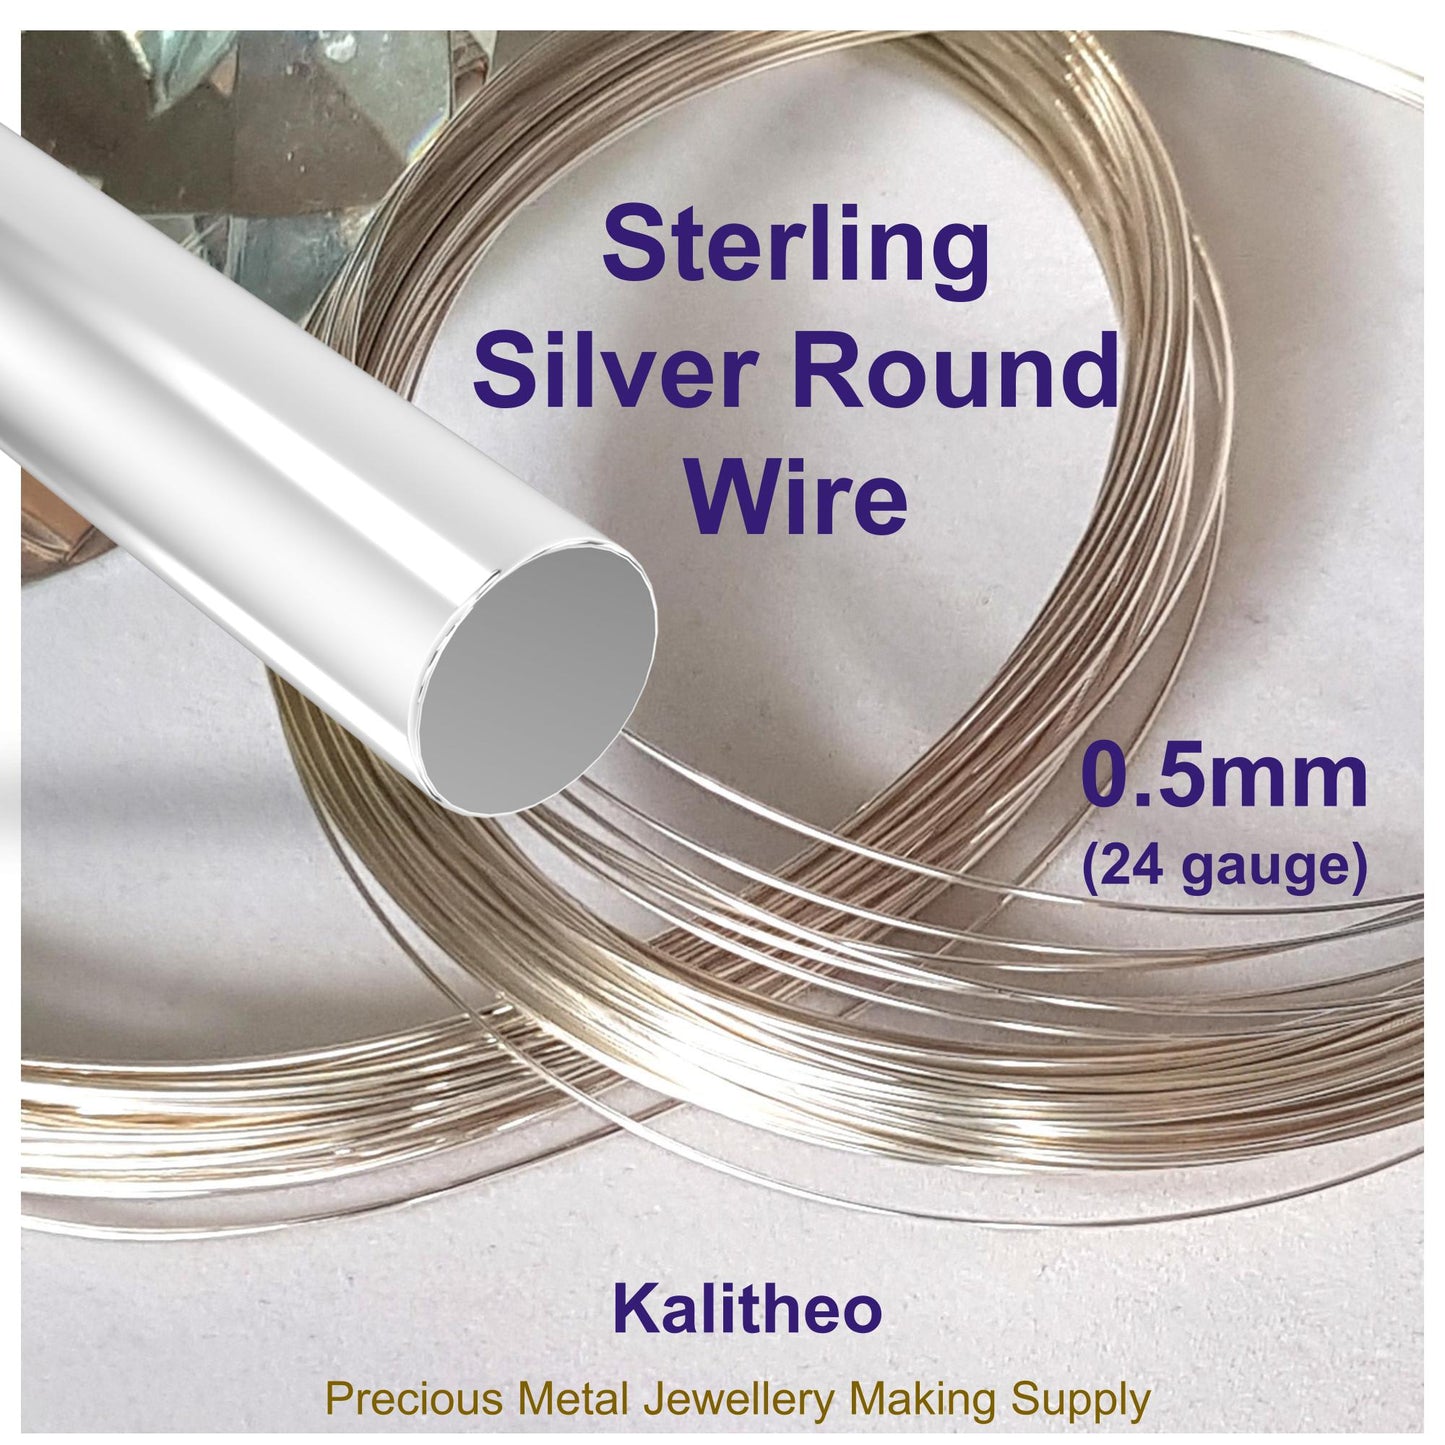 FAB Metals - 0.5mm Round Sterling Silver Wire ( 24 gauge) | Jewellery Making Supply